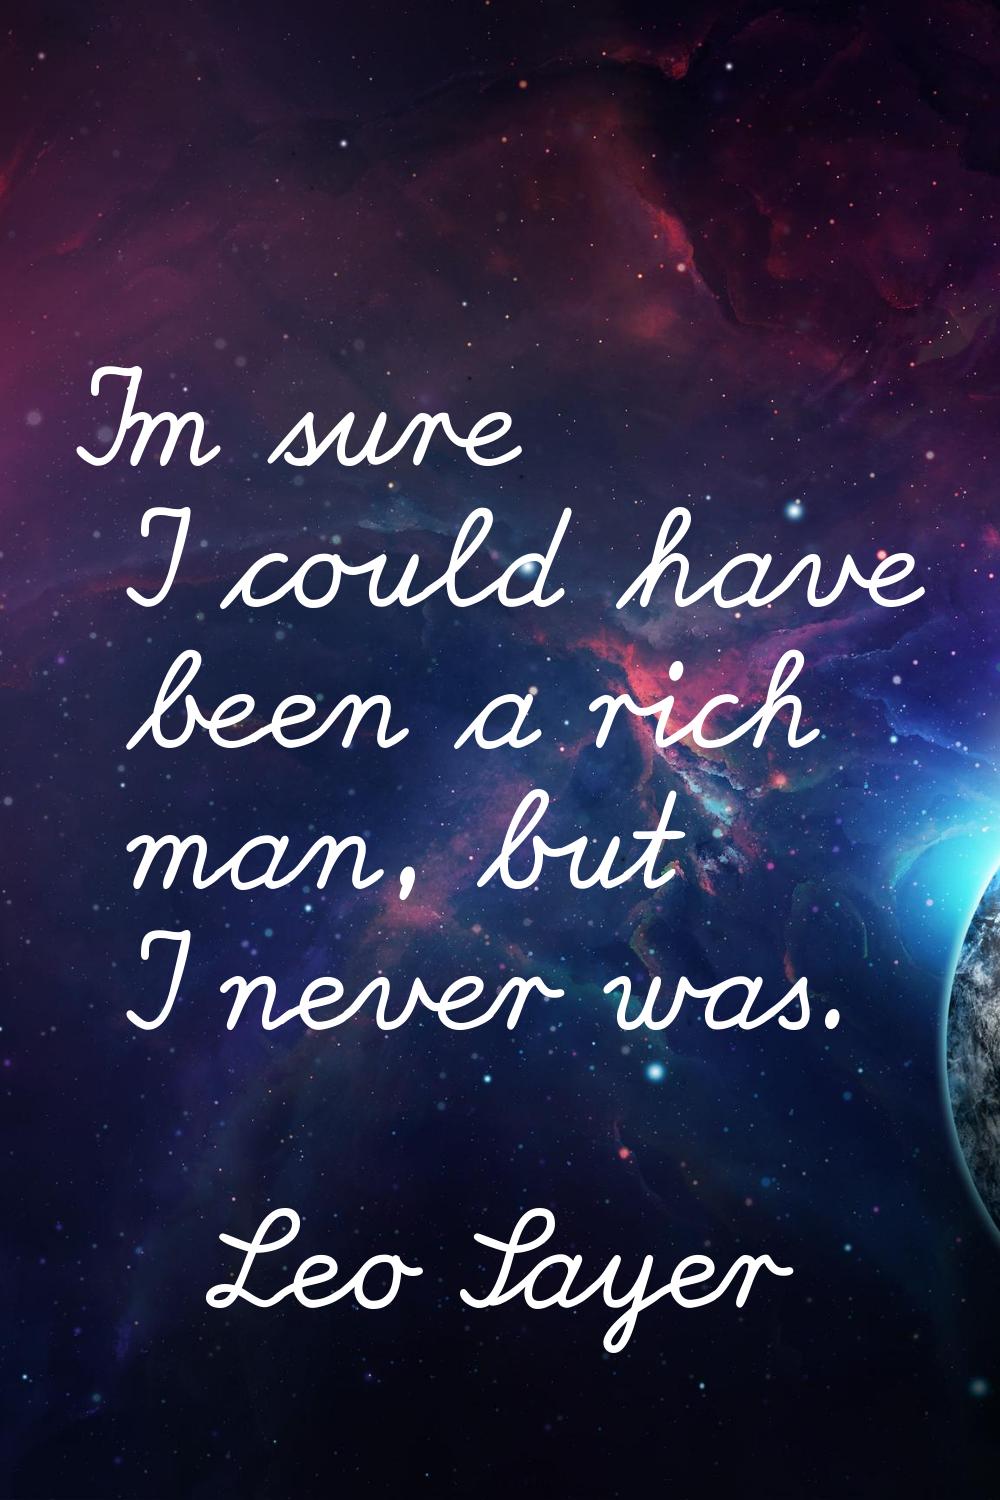 I'm sure I could have been a rich man, but I never was.